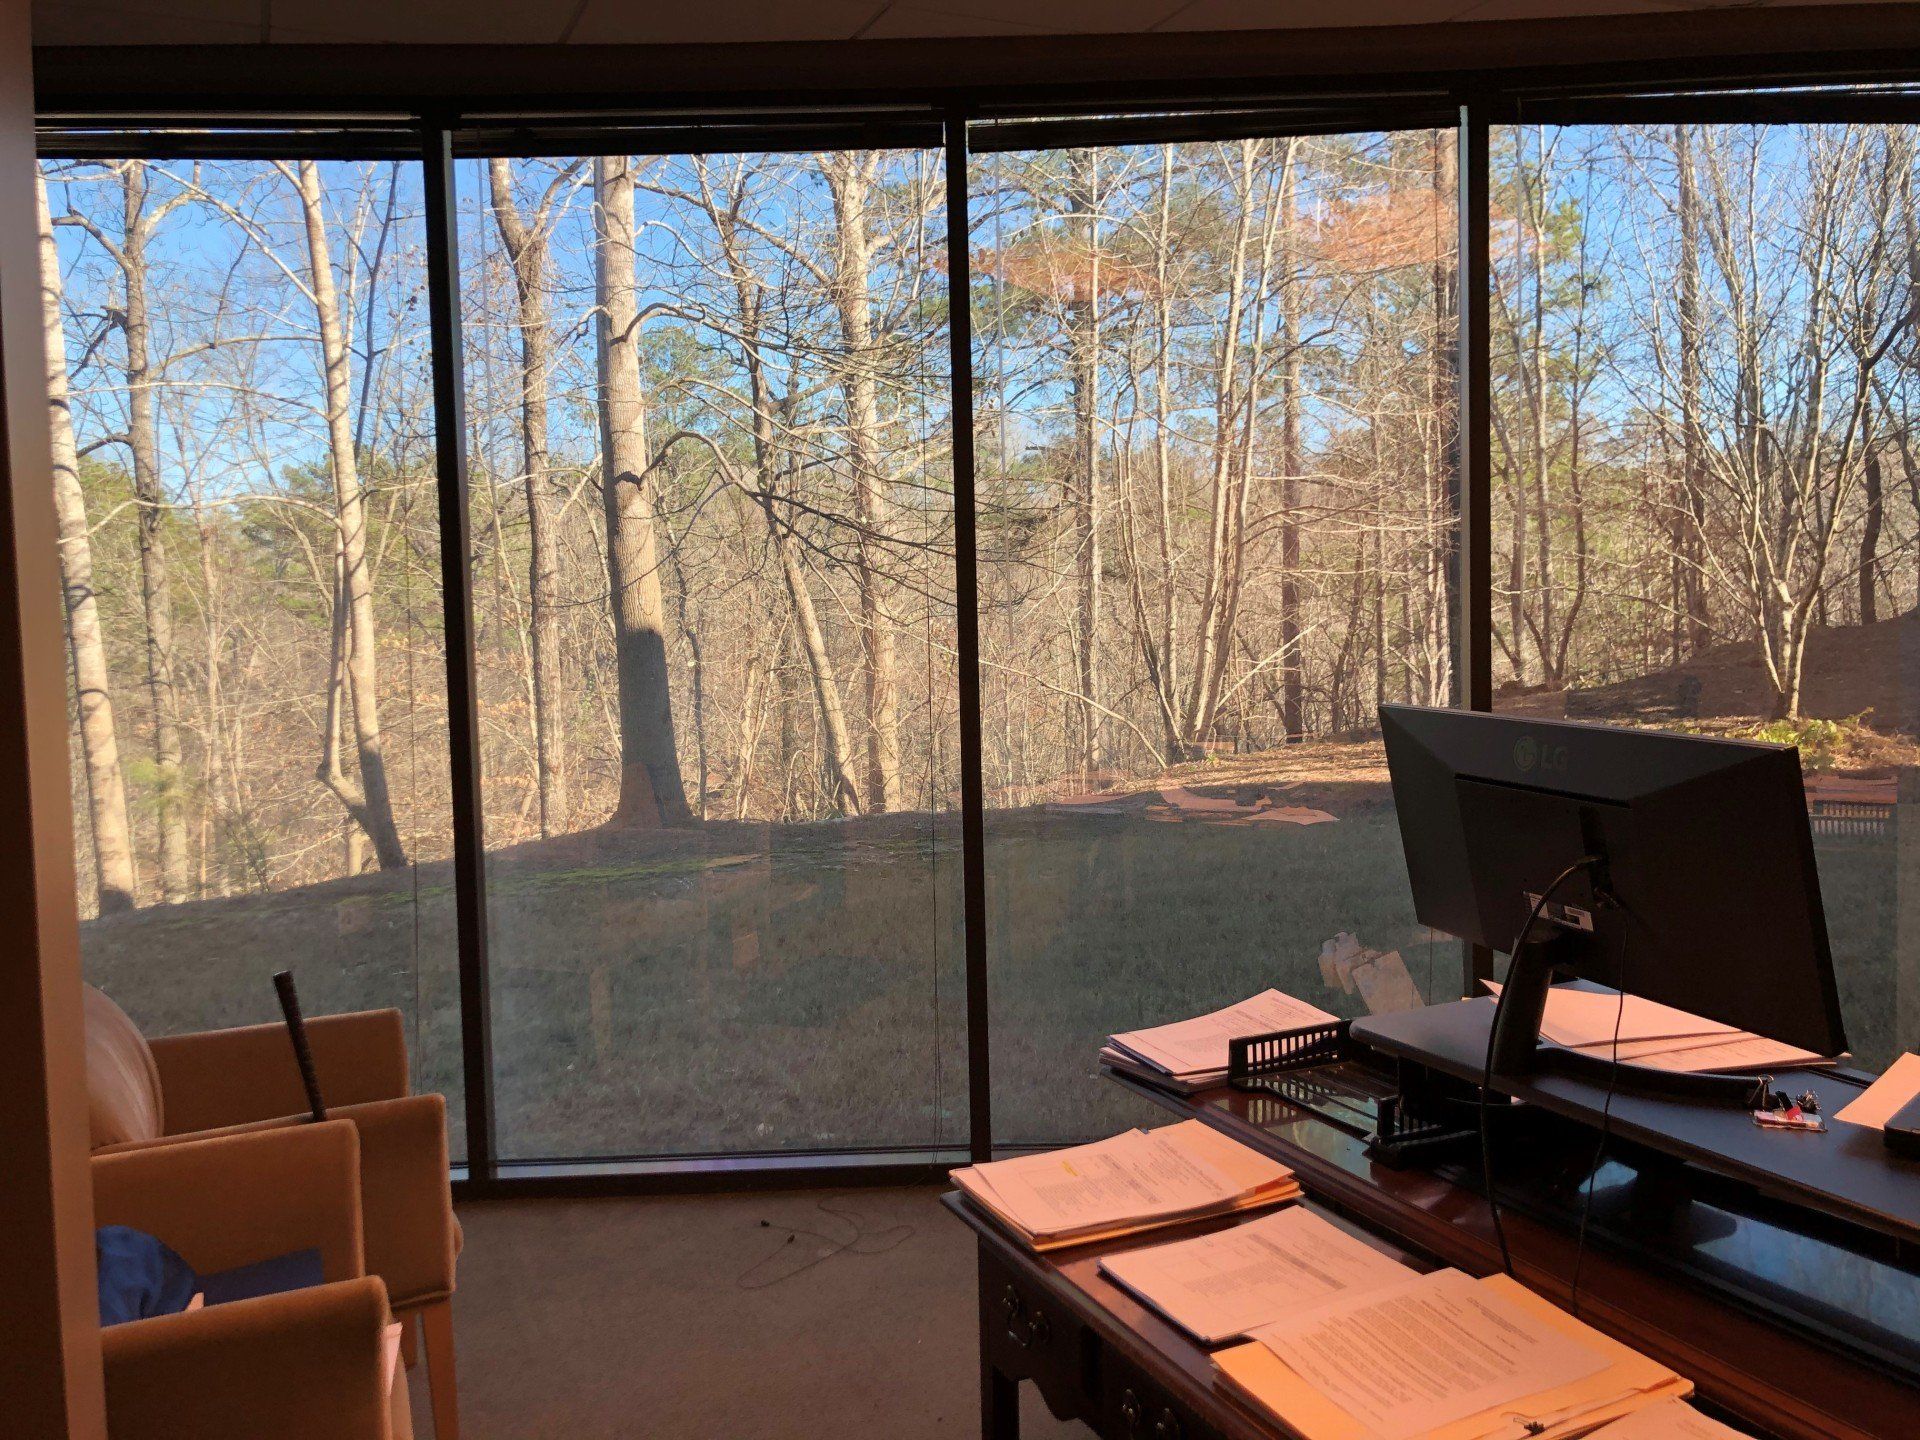 Professional home or office tinting in Birmingham AL - Heat rejected and bright UV Glare eliminated after spf tint installed in Birmingham, AL